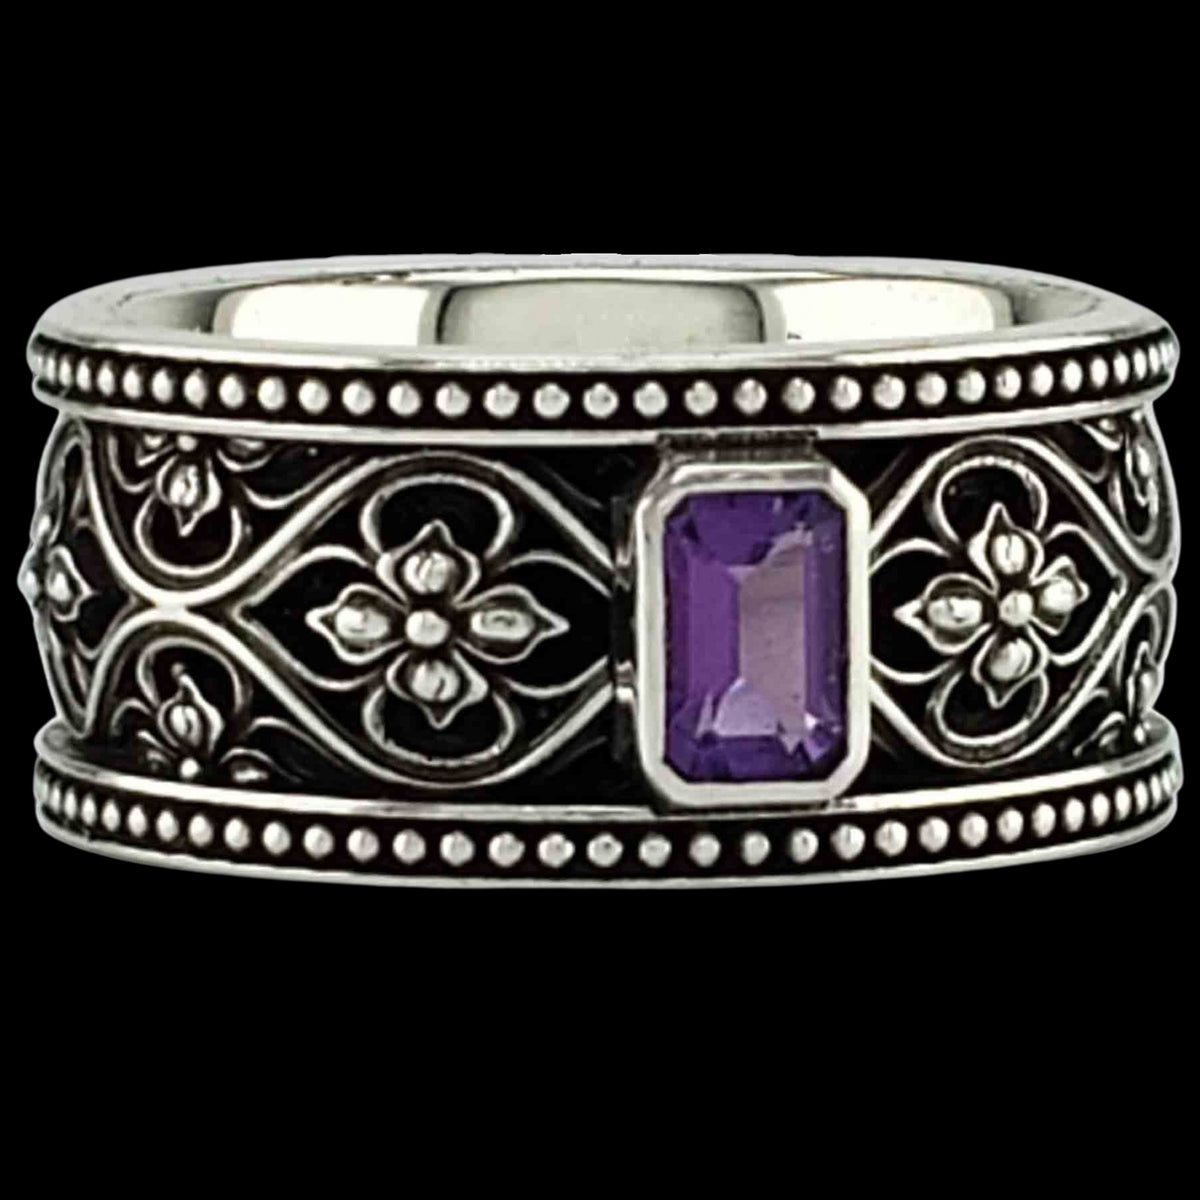 VALENCIA SOLITAIRE Band Ring in GOLD with CHOICE OF 5mm GEMSTONE - Starting at $1049